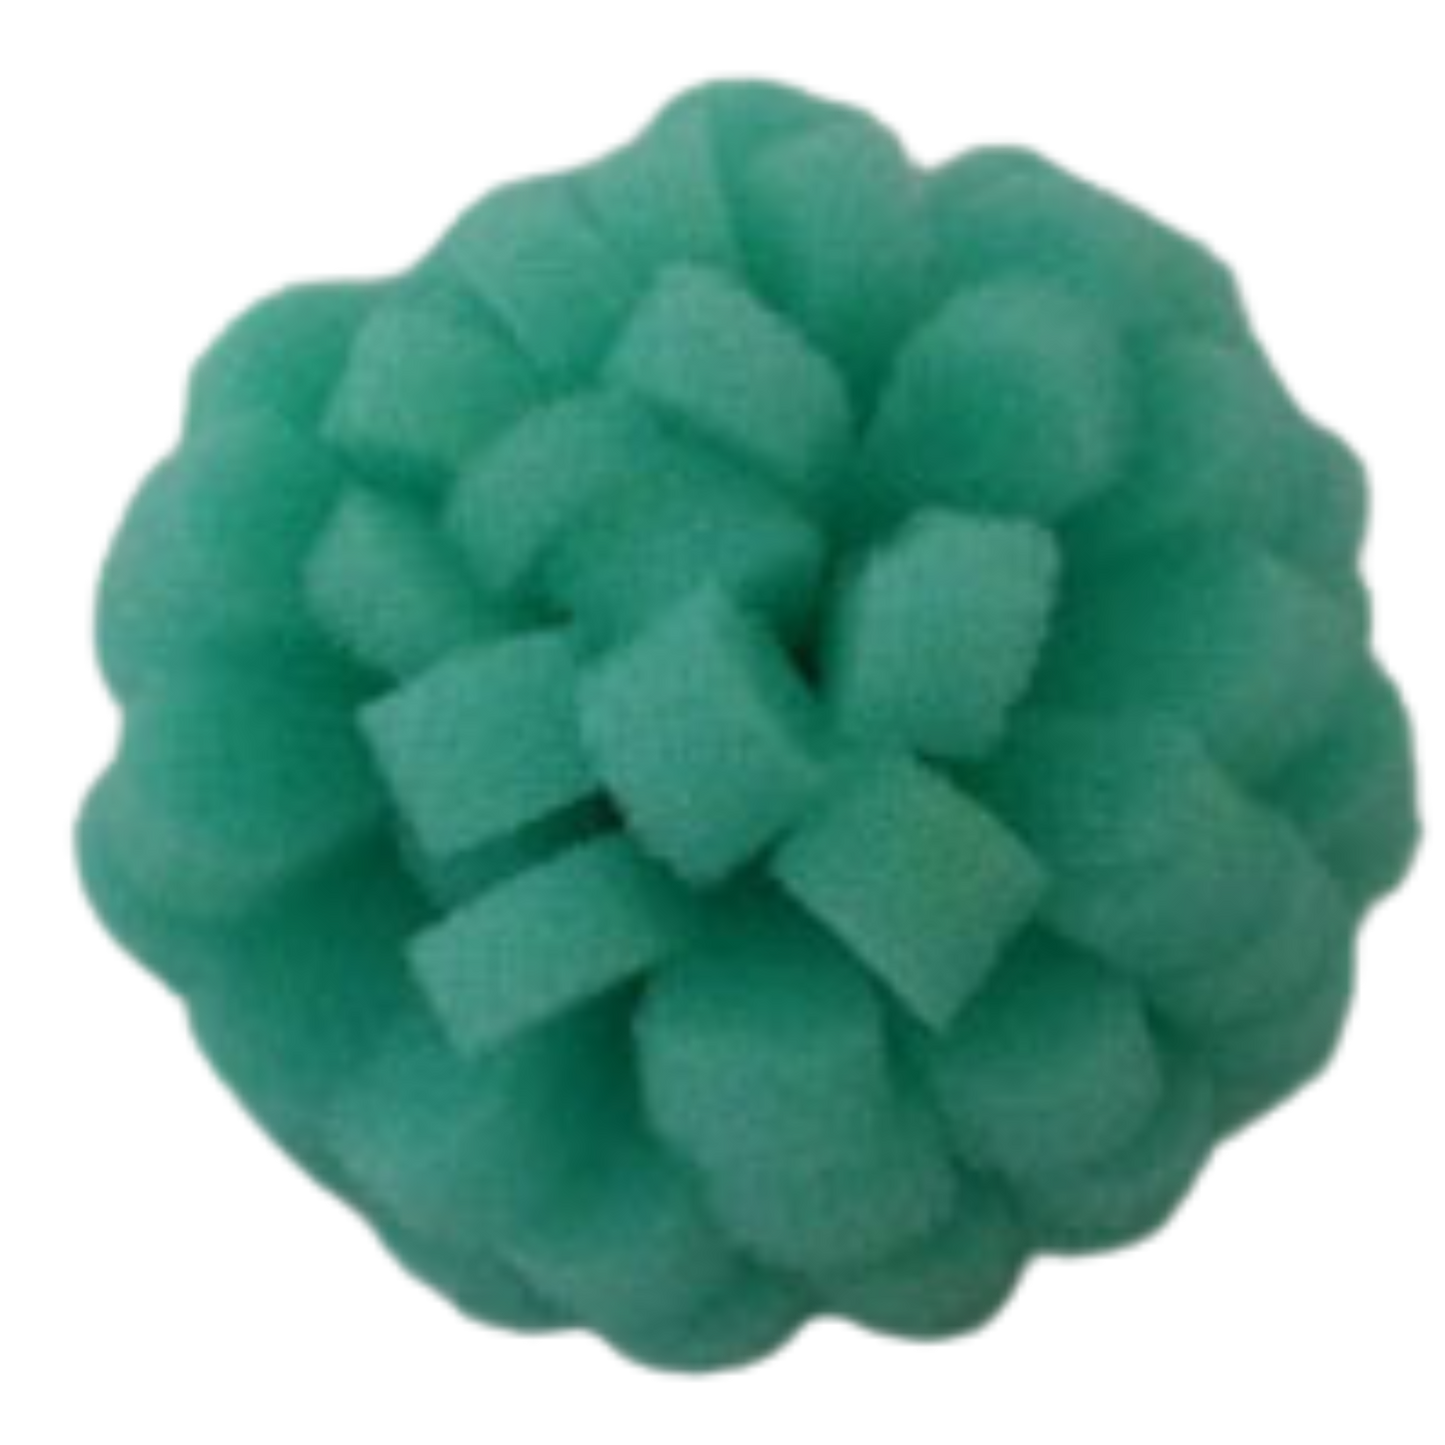 mini green mini exfoliating buffing ball. Ideal for all skin types, benefits for eczema, combination skin and rosacea